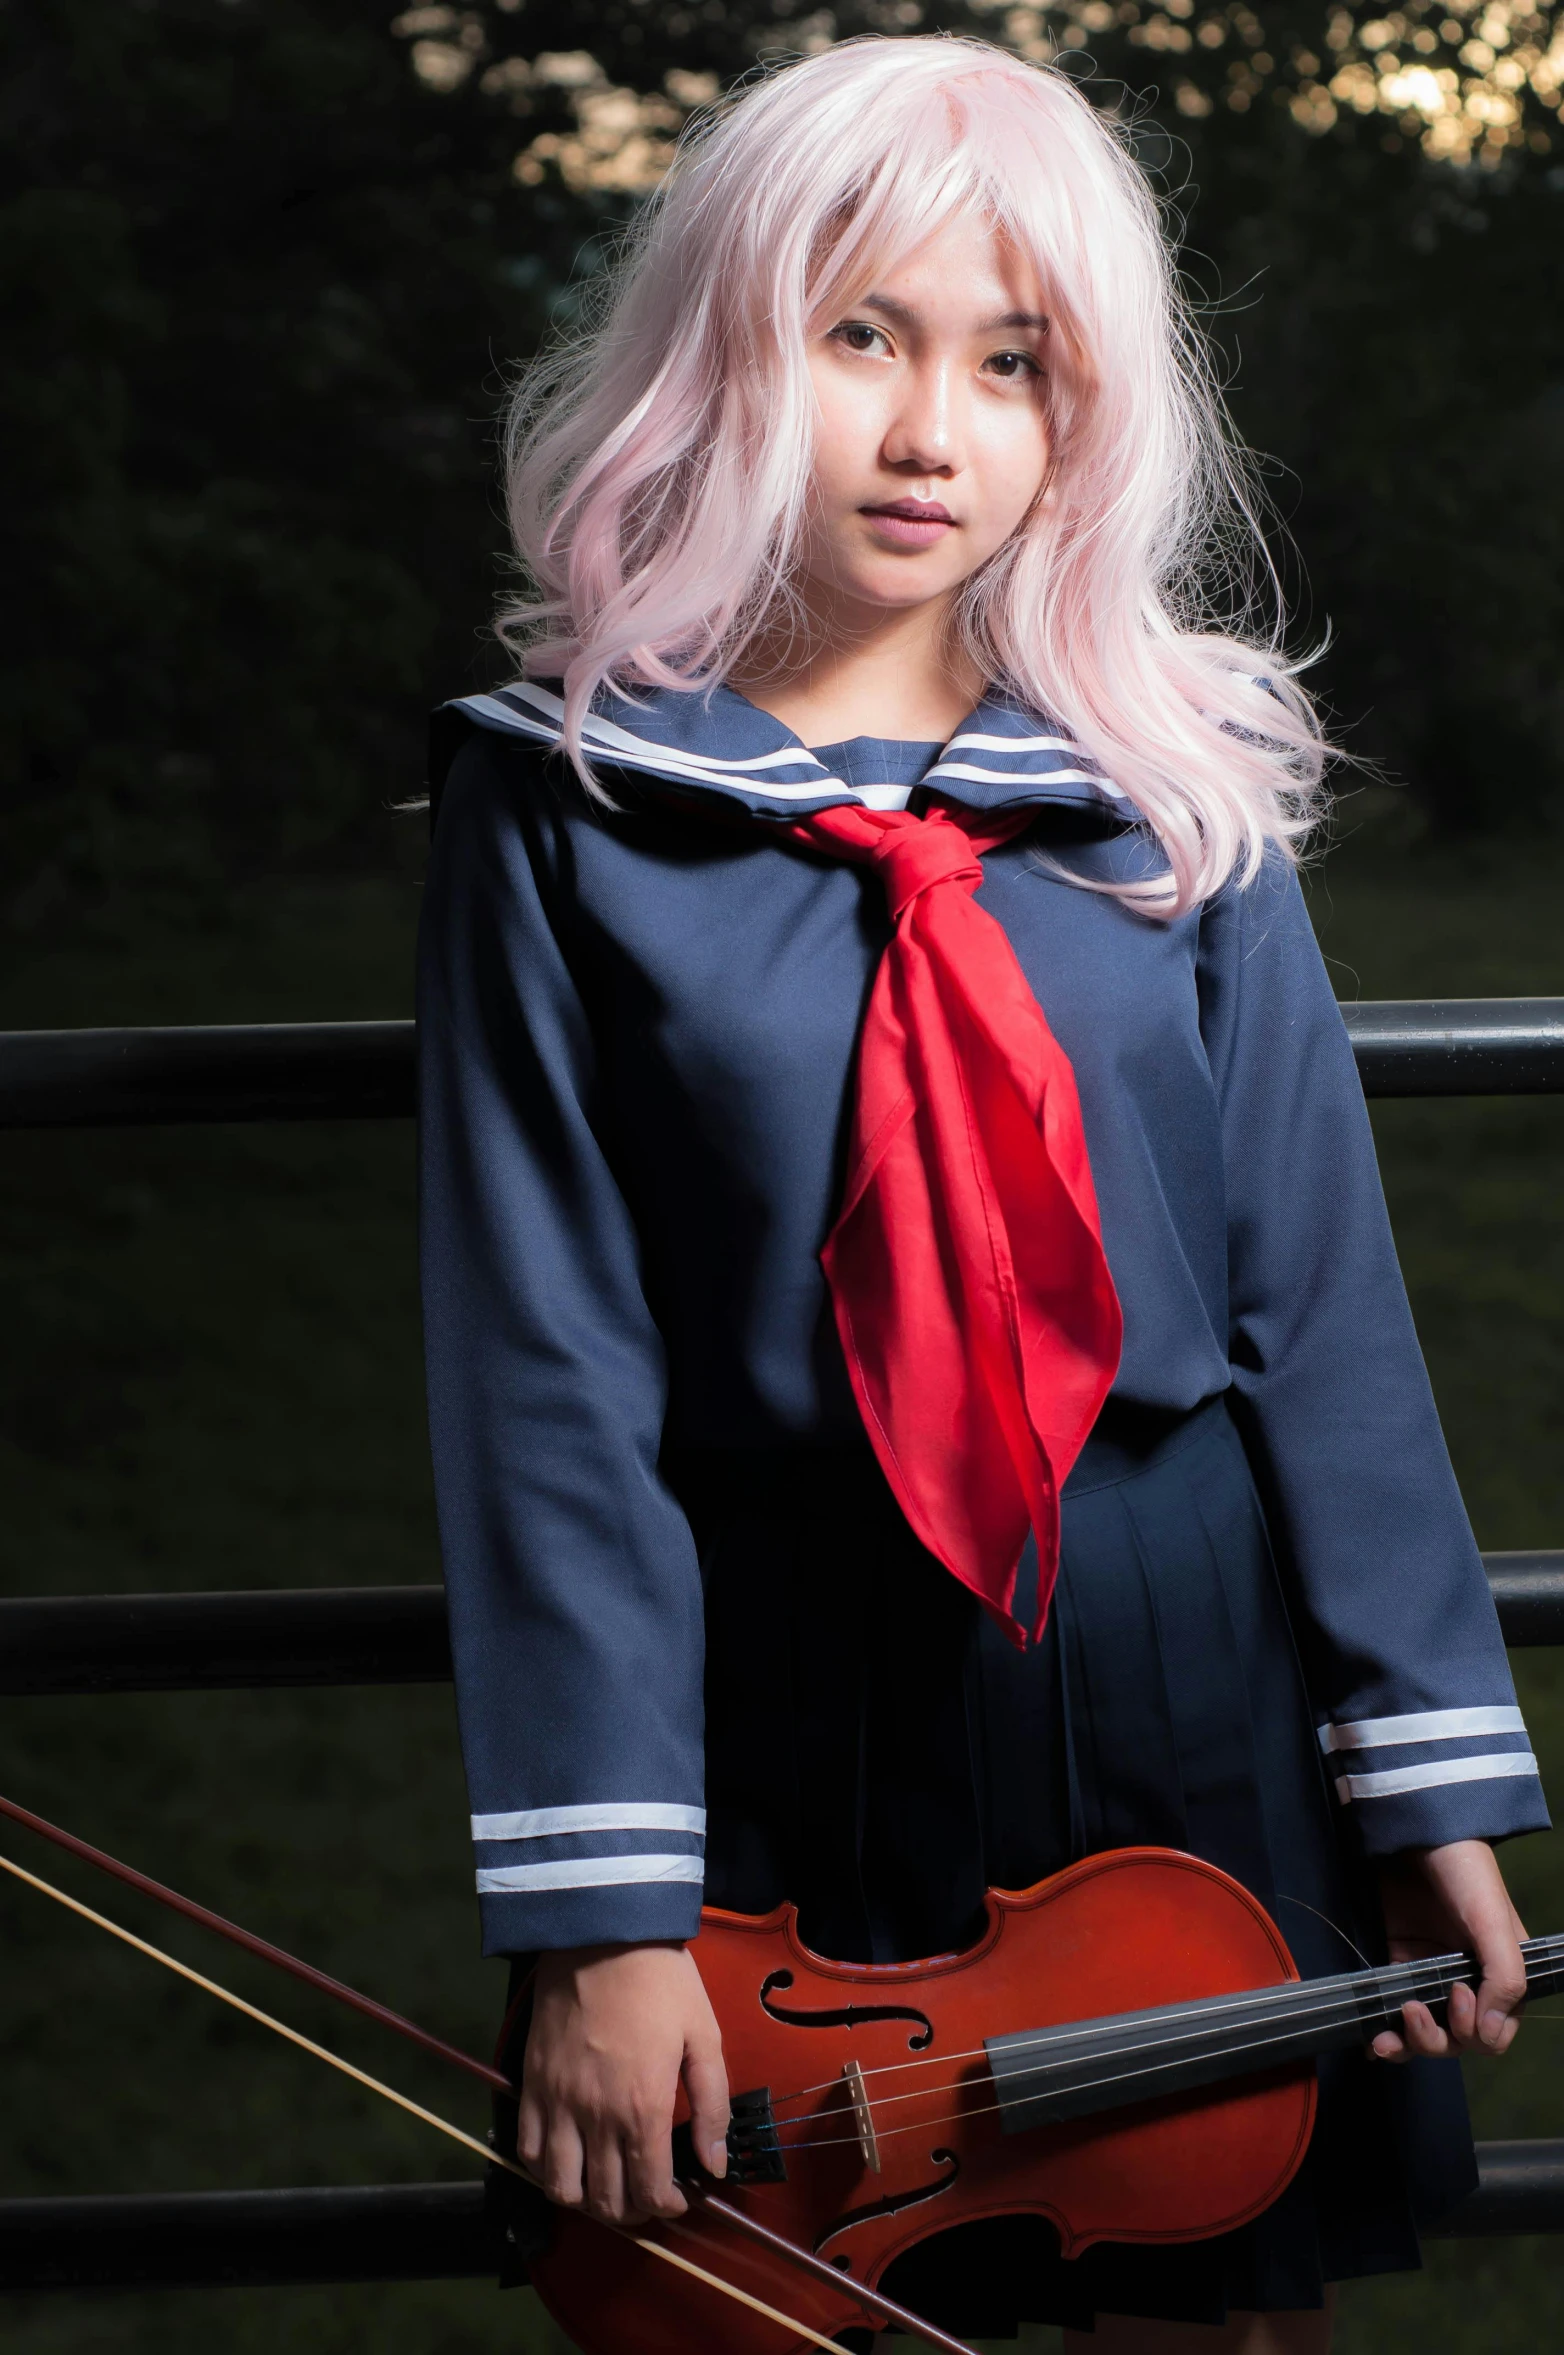 a girl with a pink hair, blue shirt and a red tie and violin